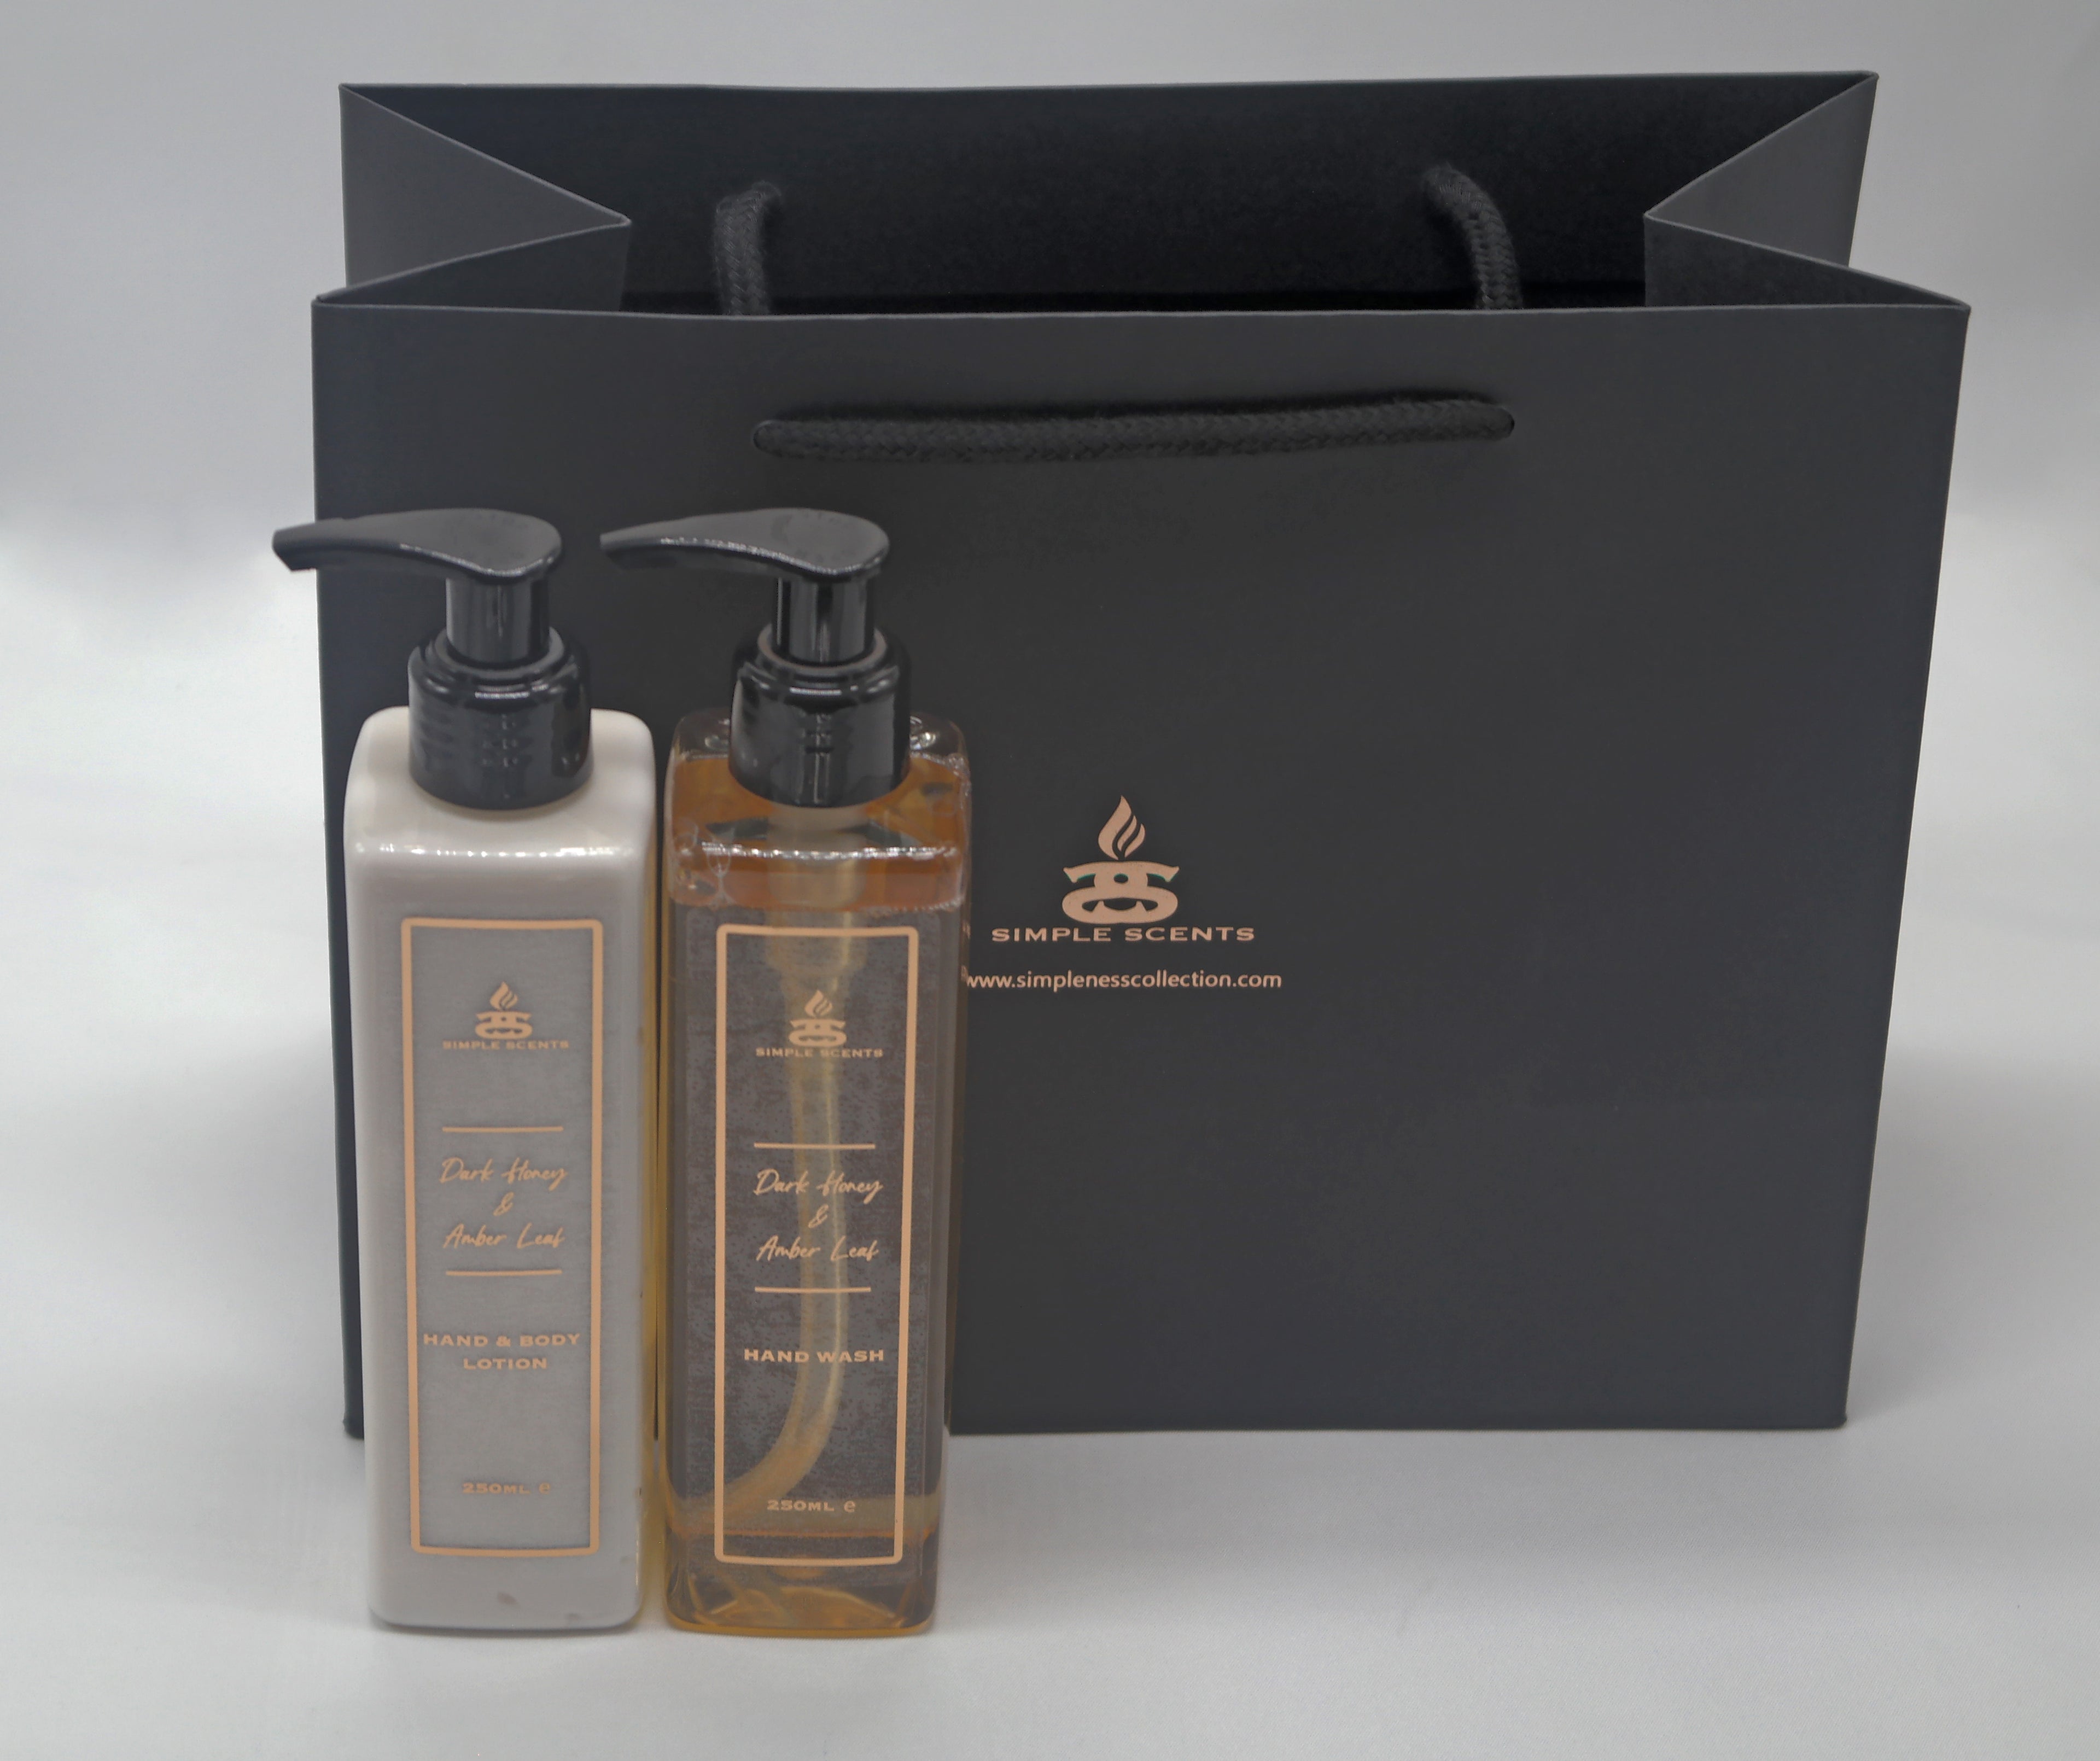 Simple Scents Dark Honey & Amber Leaf Hand Wash and Lotion in front of black gift bag